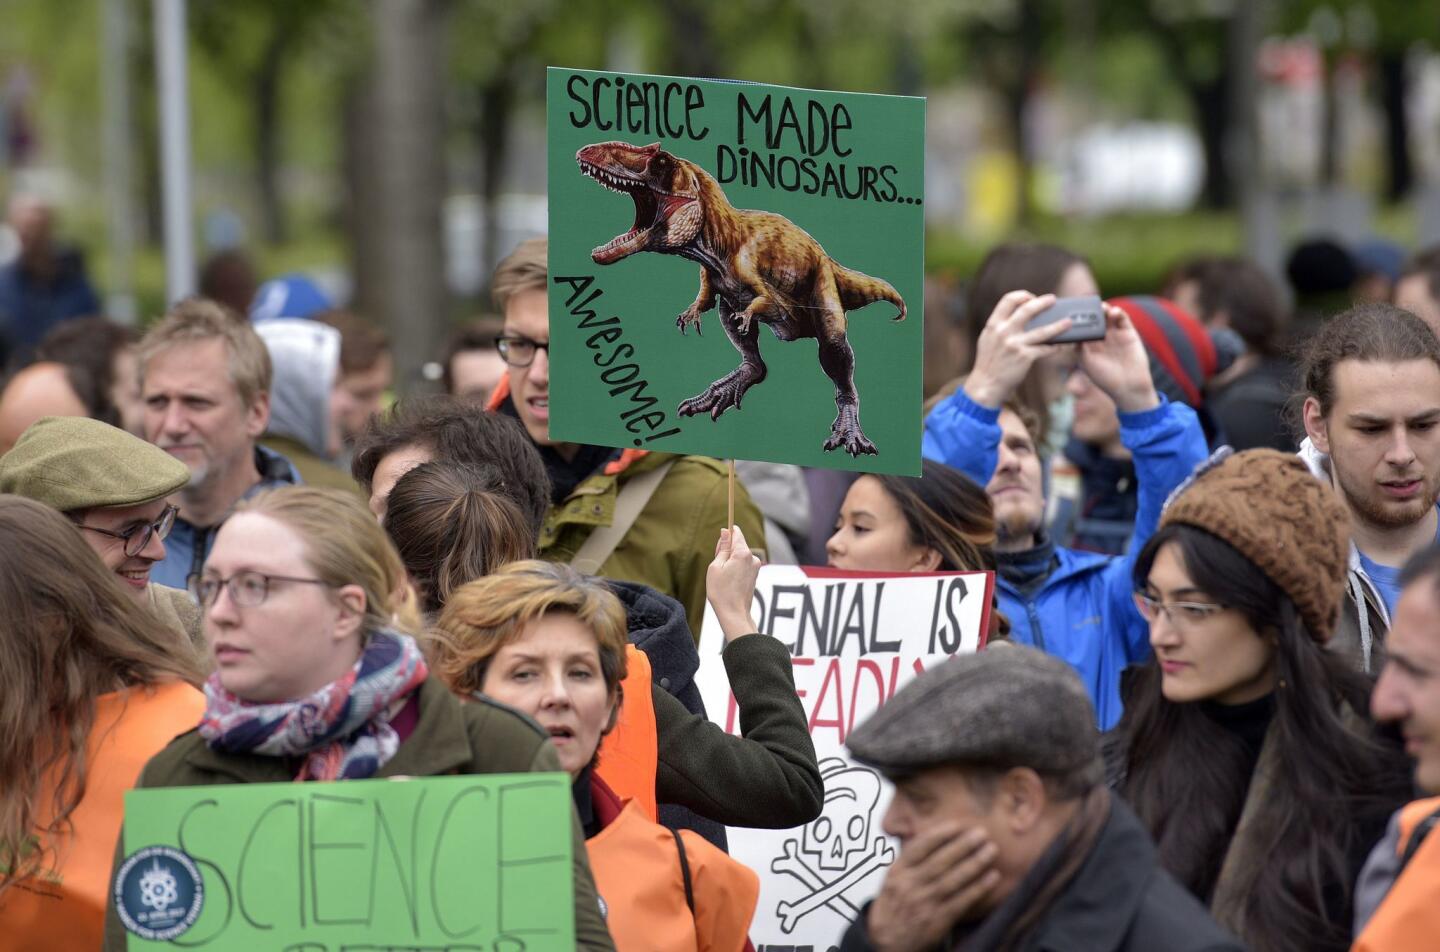 March for Science, Austria